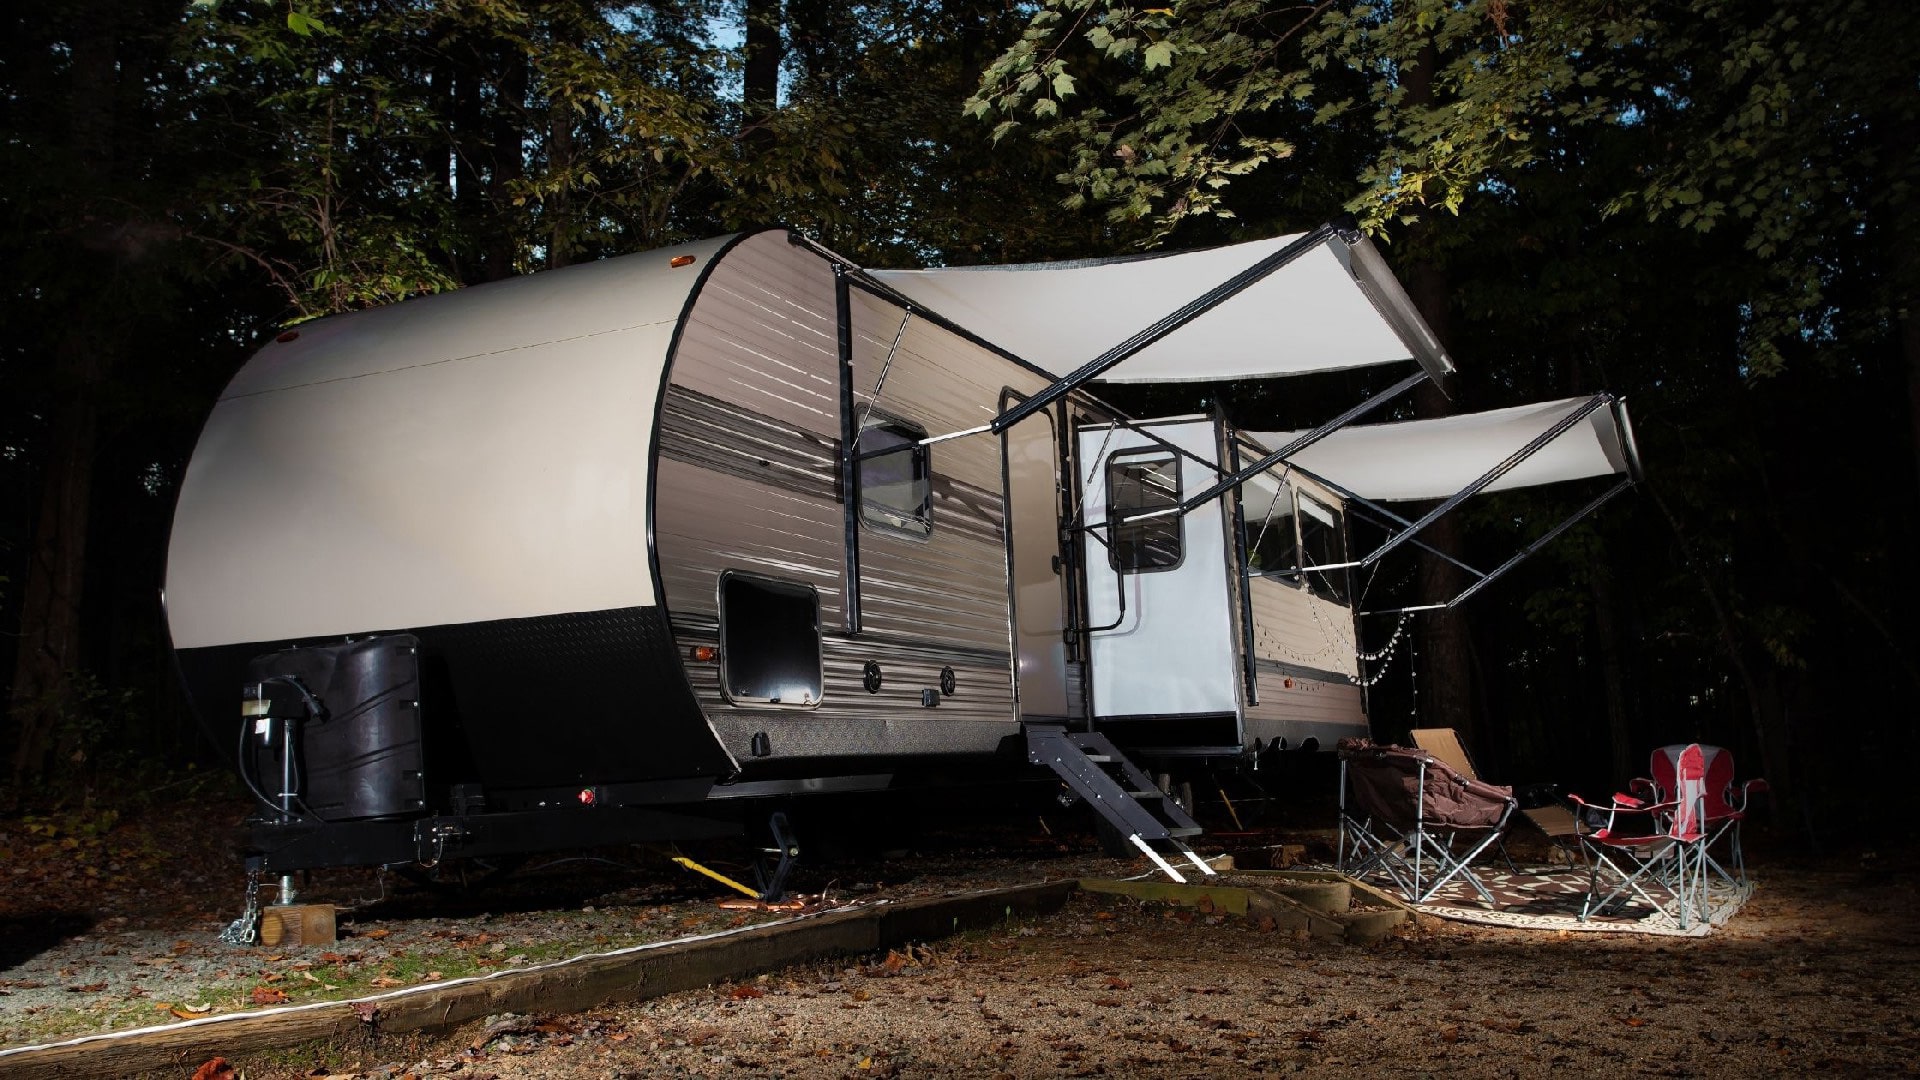 How To Level a Travel Trailer?